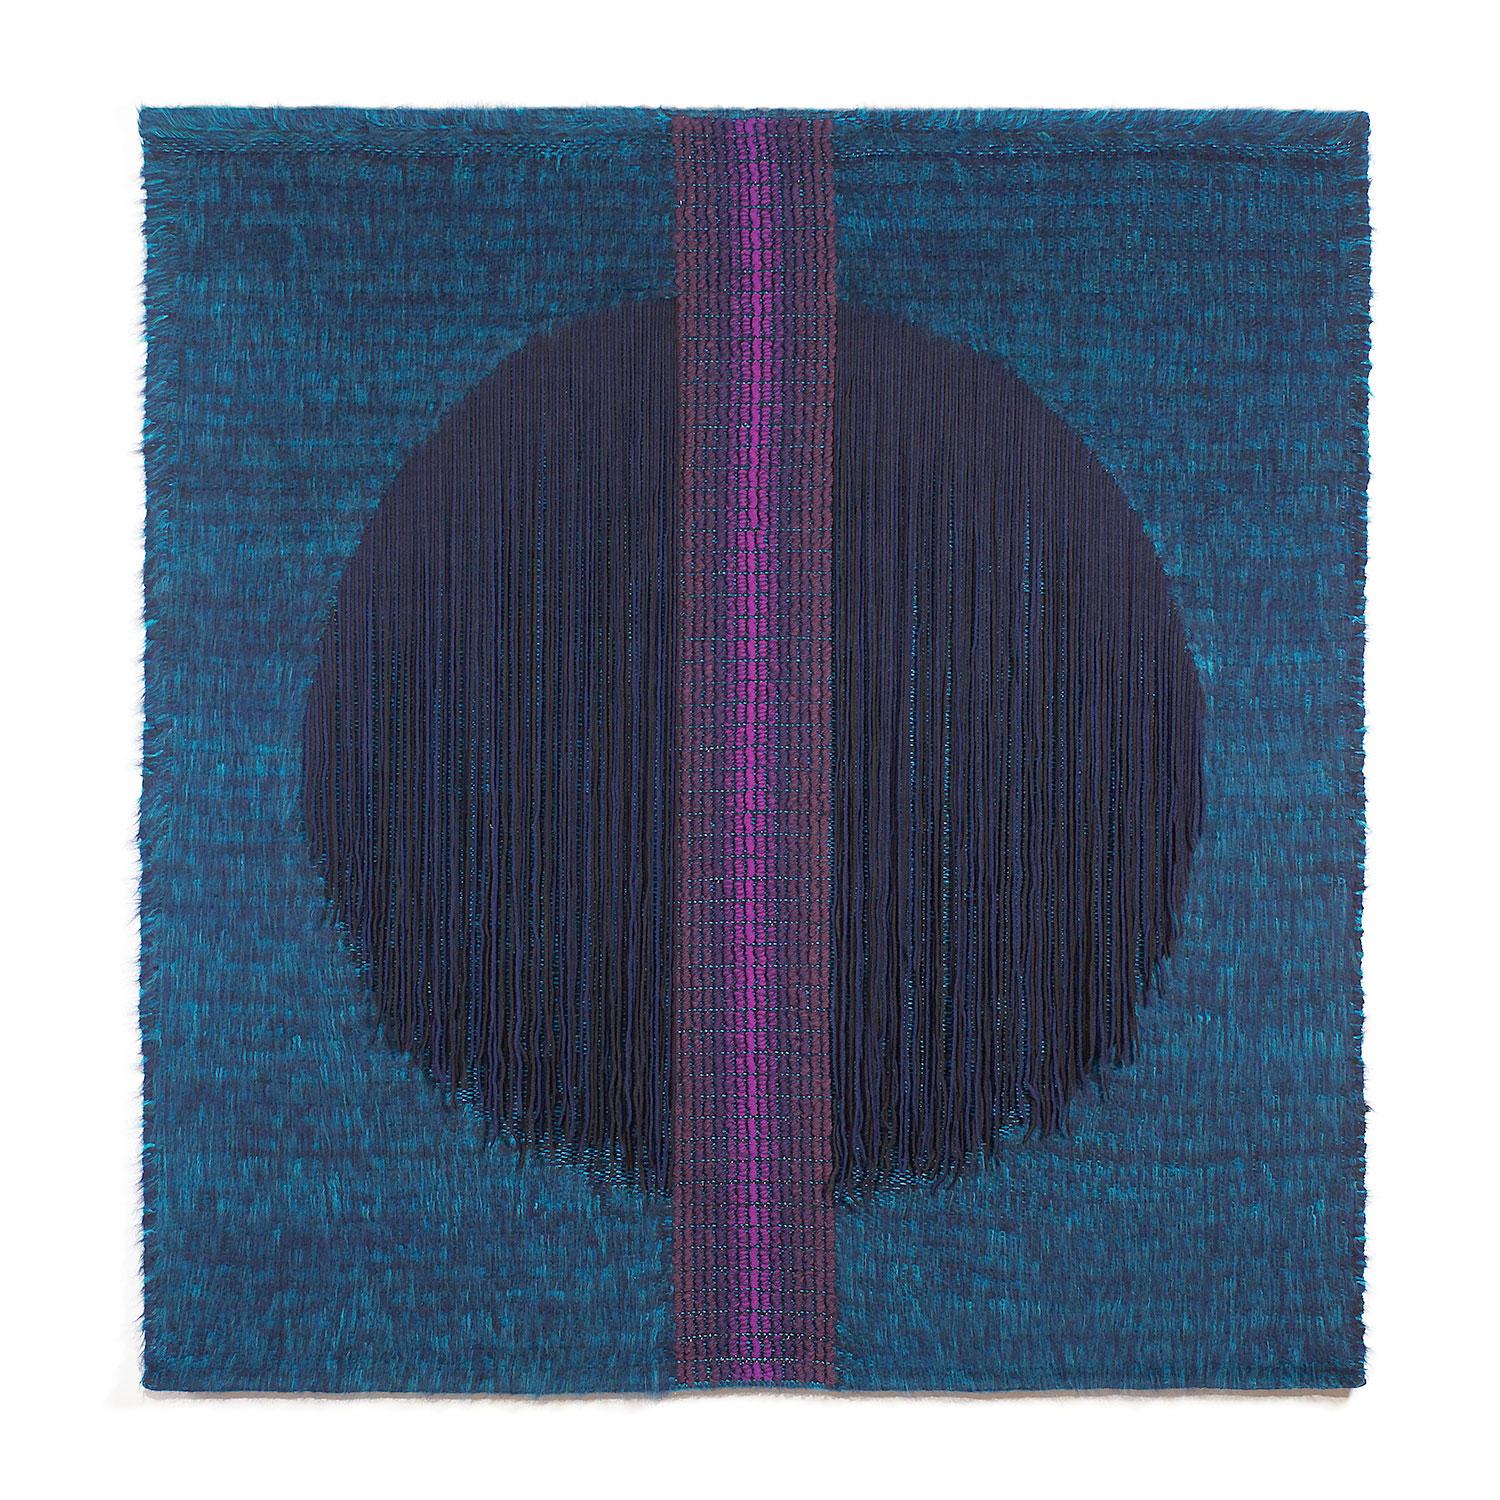 Mariette Rousseau-Vermette Abstract Sculpture - Hommage a Rothko, Mid-Century Geometric Abstract Woven Tapestry